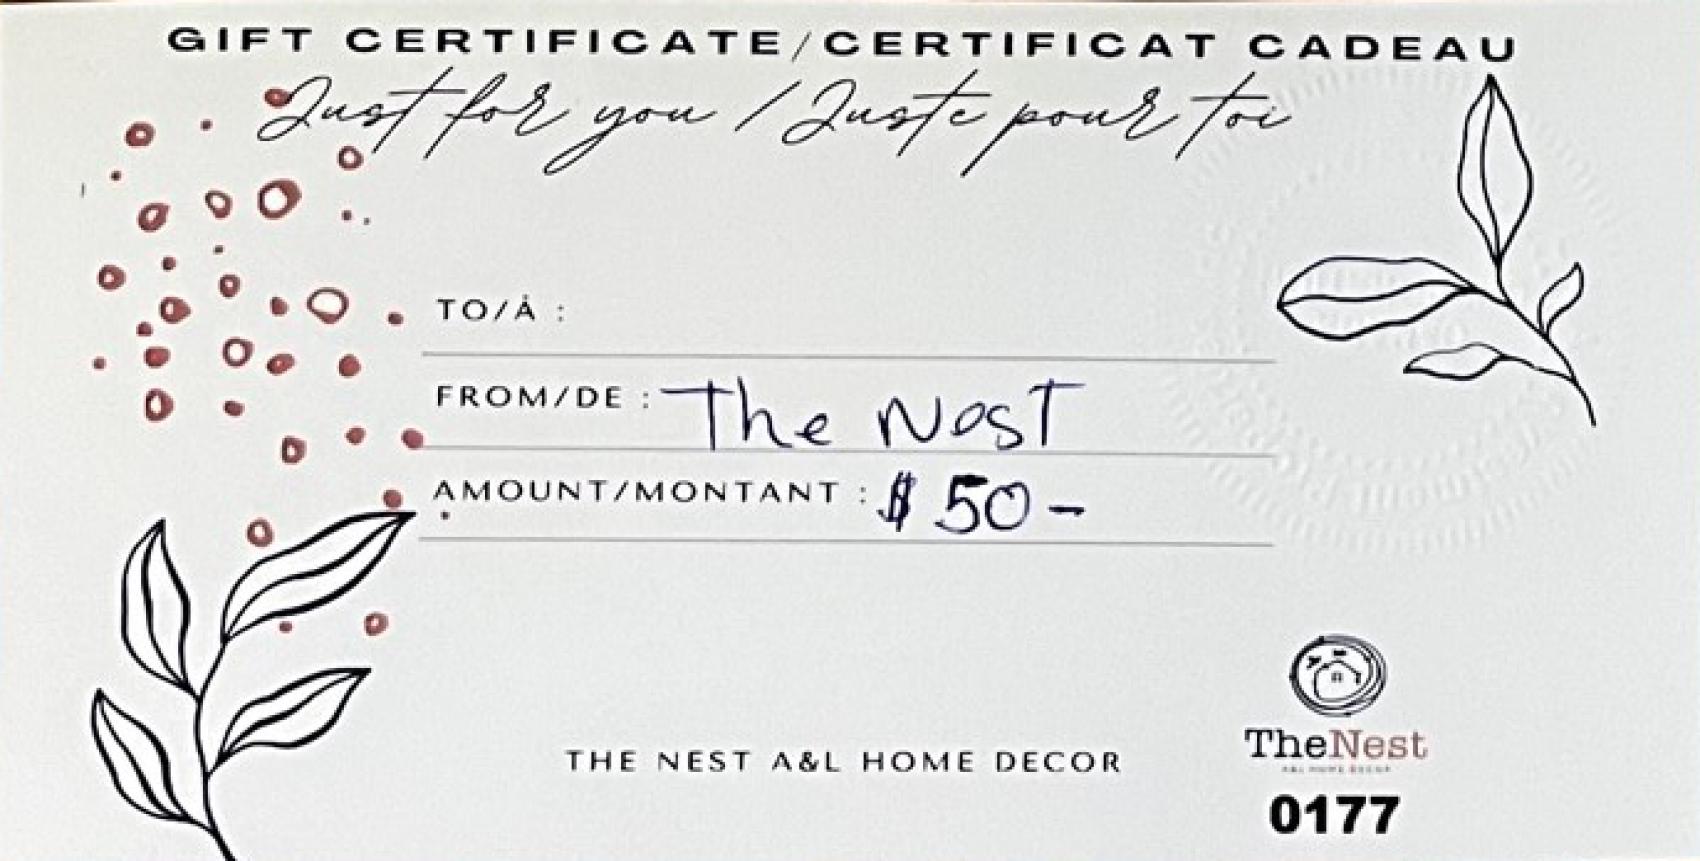 The Nest Gift Certificate